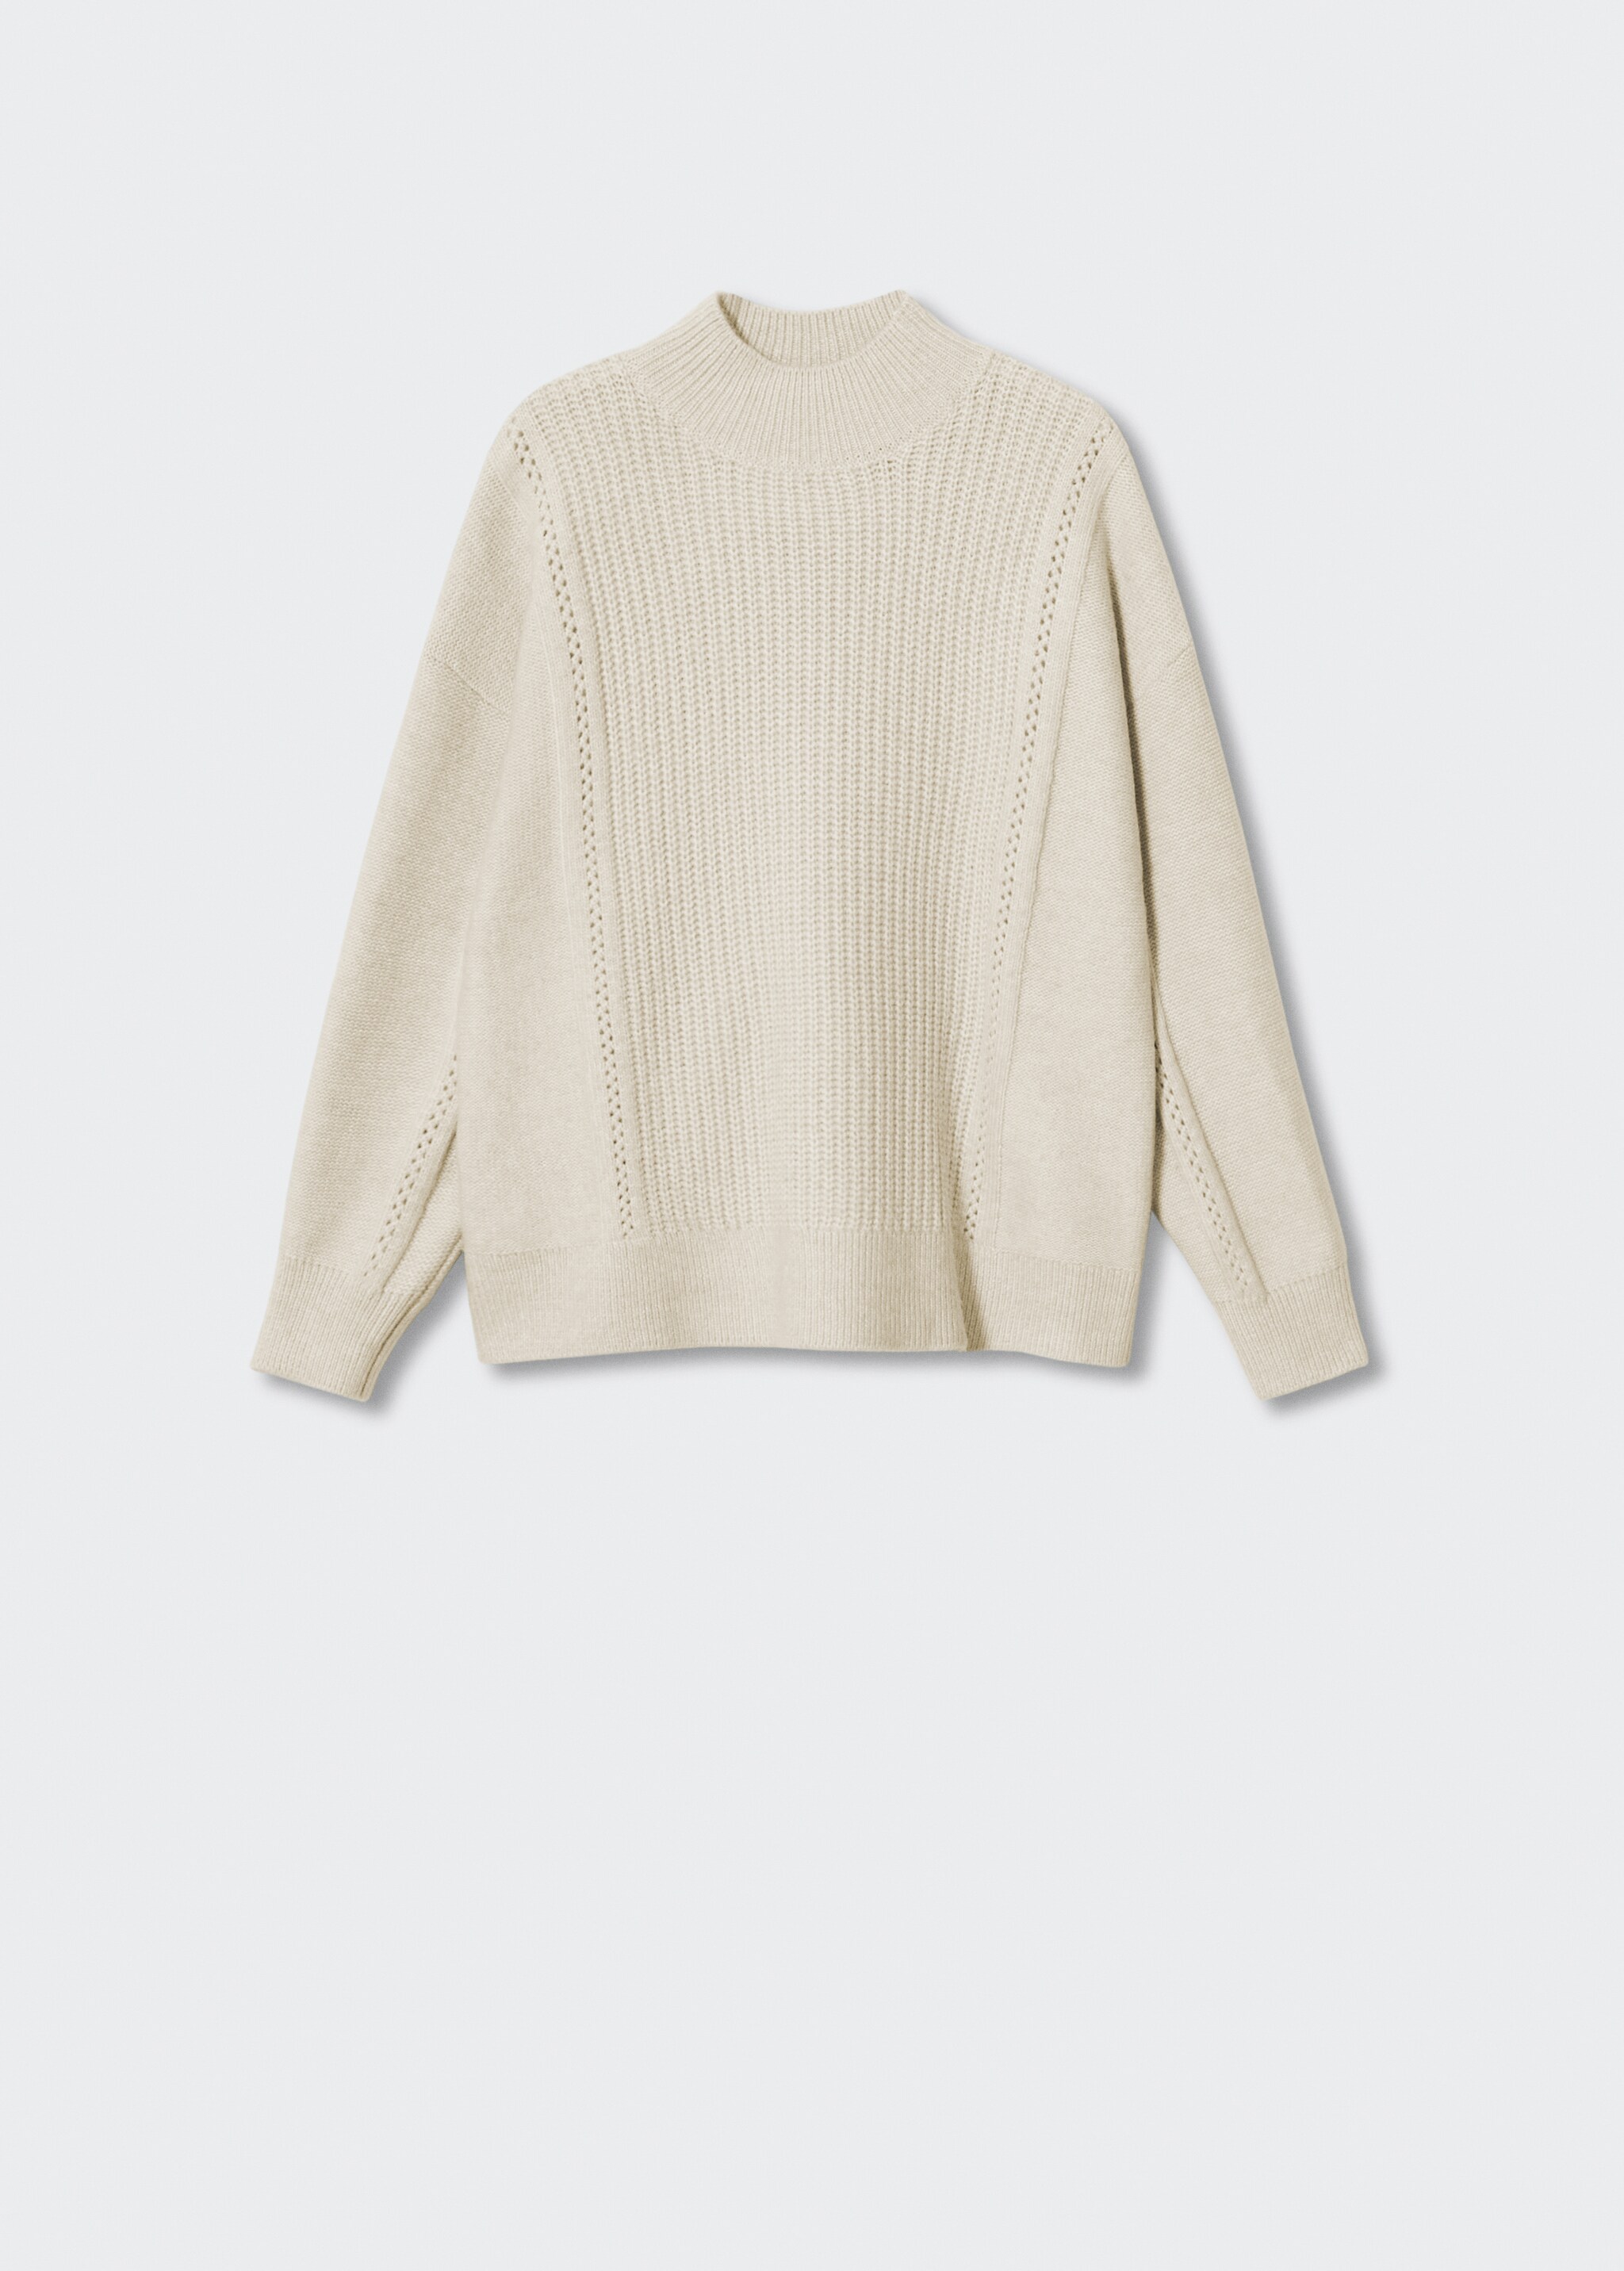 Perkins neck knitted sweater - Article without model